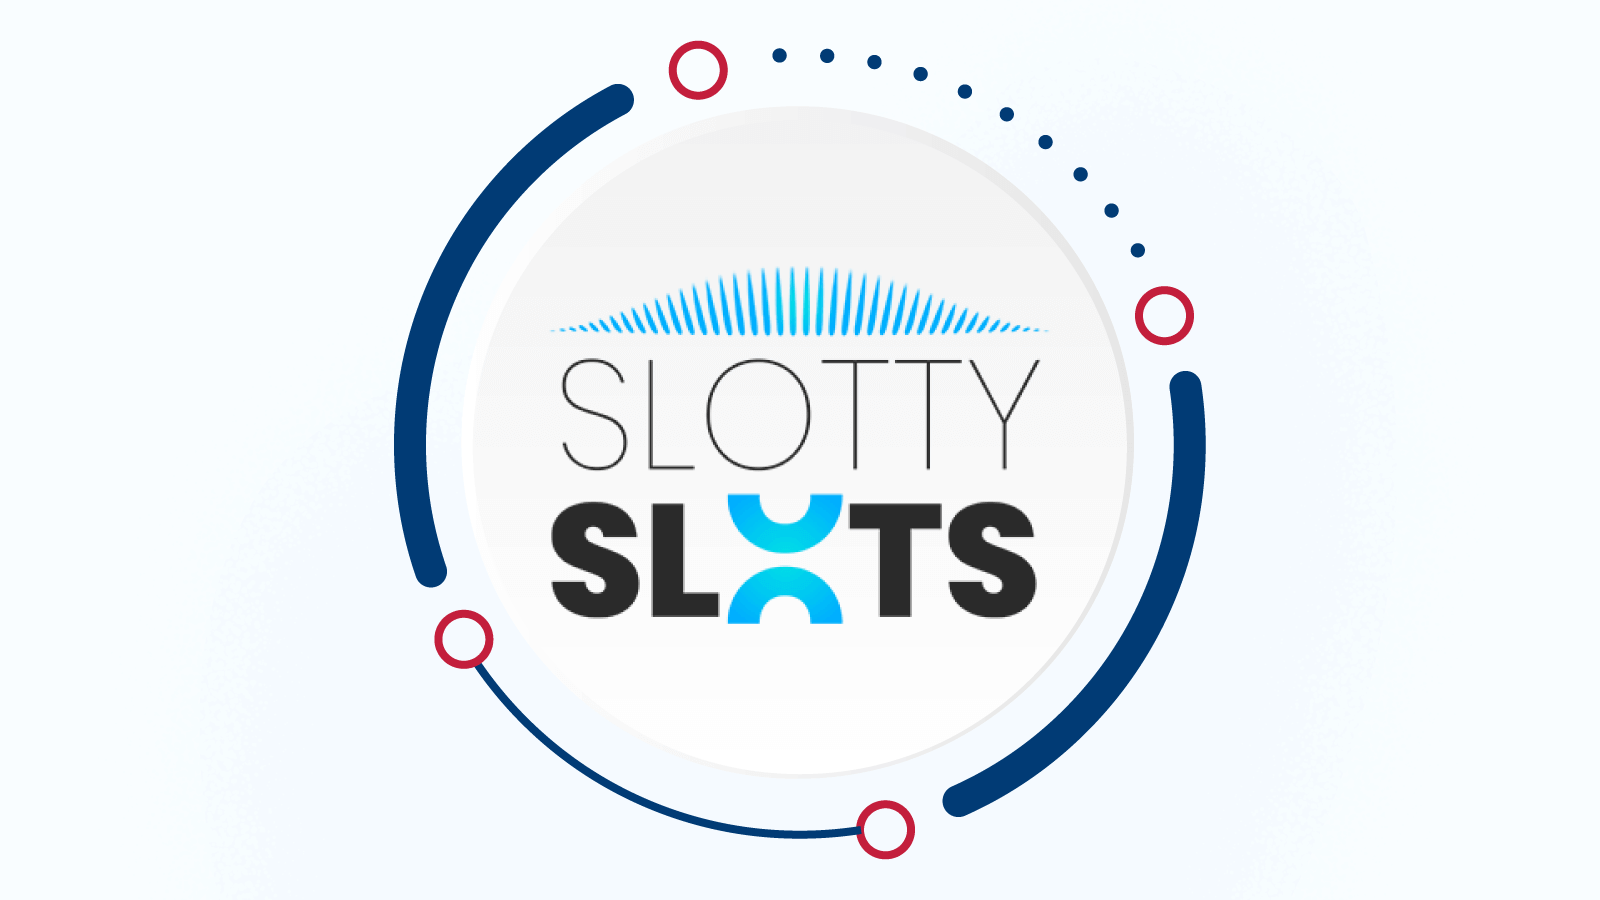 10% Cashback up to £200 at Slotty Slots Casino The best casino cashback on losses